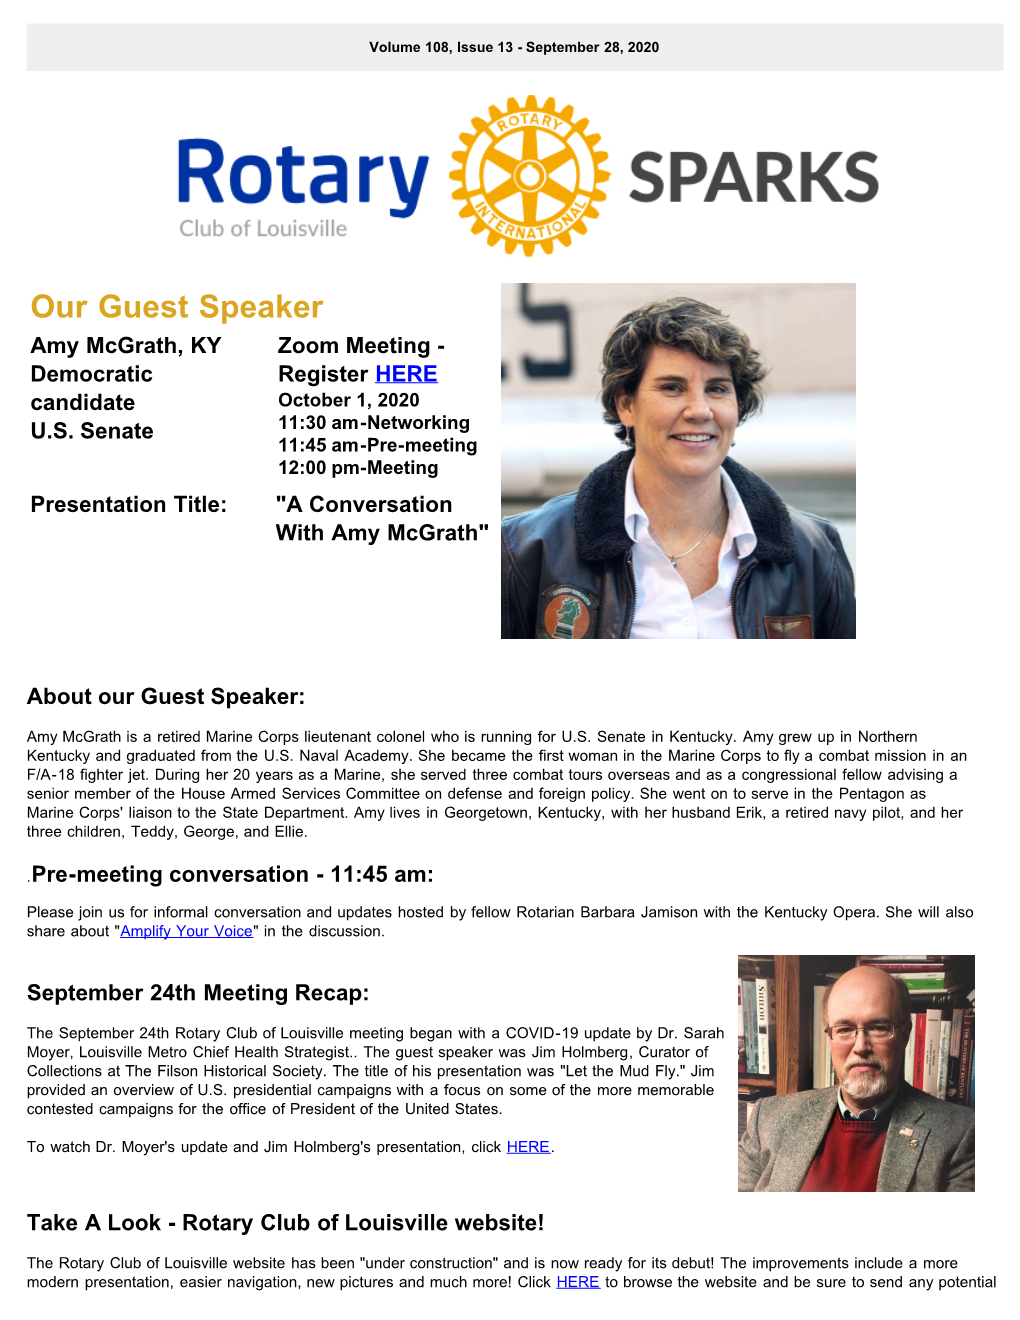 Our Guest Speaker Amy Mcgrath, KY Zoom Meeting - Democratic Register HERE Candidate October 1, 2020 U.S